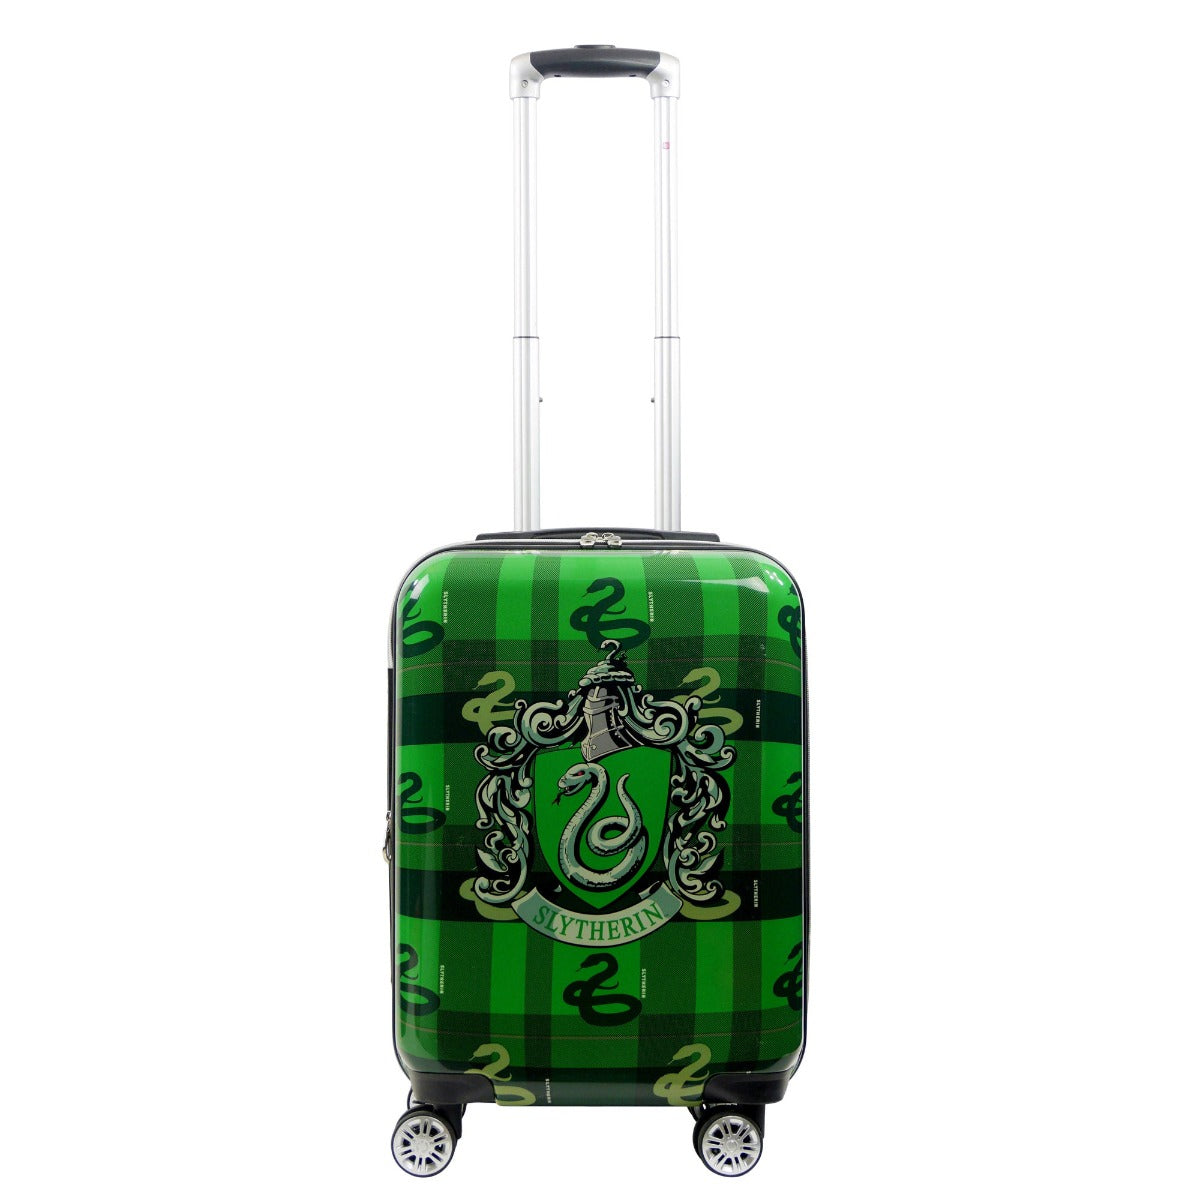 Harry Potter Slytherin 22 inch green carry-on luggage - best spinner suitcase for traveling